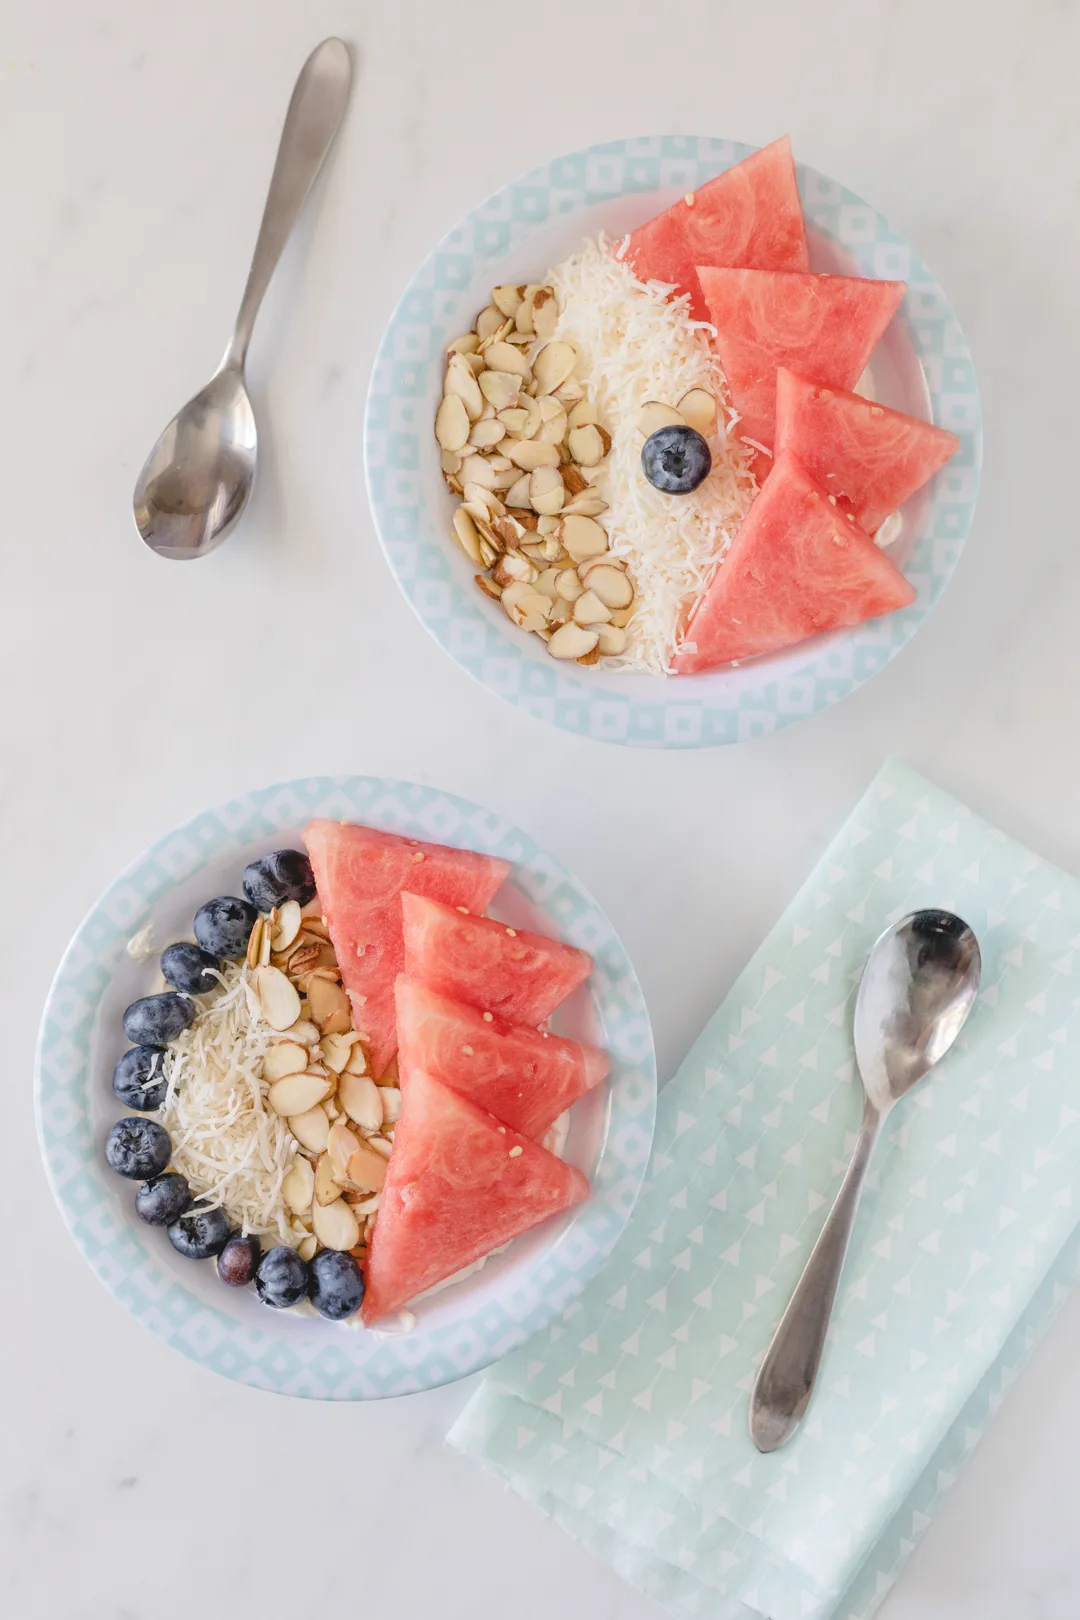 Watermelon Power Bowls. Delish way to start the day or enjoy a nutrient loaded snack.